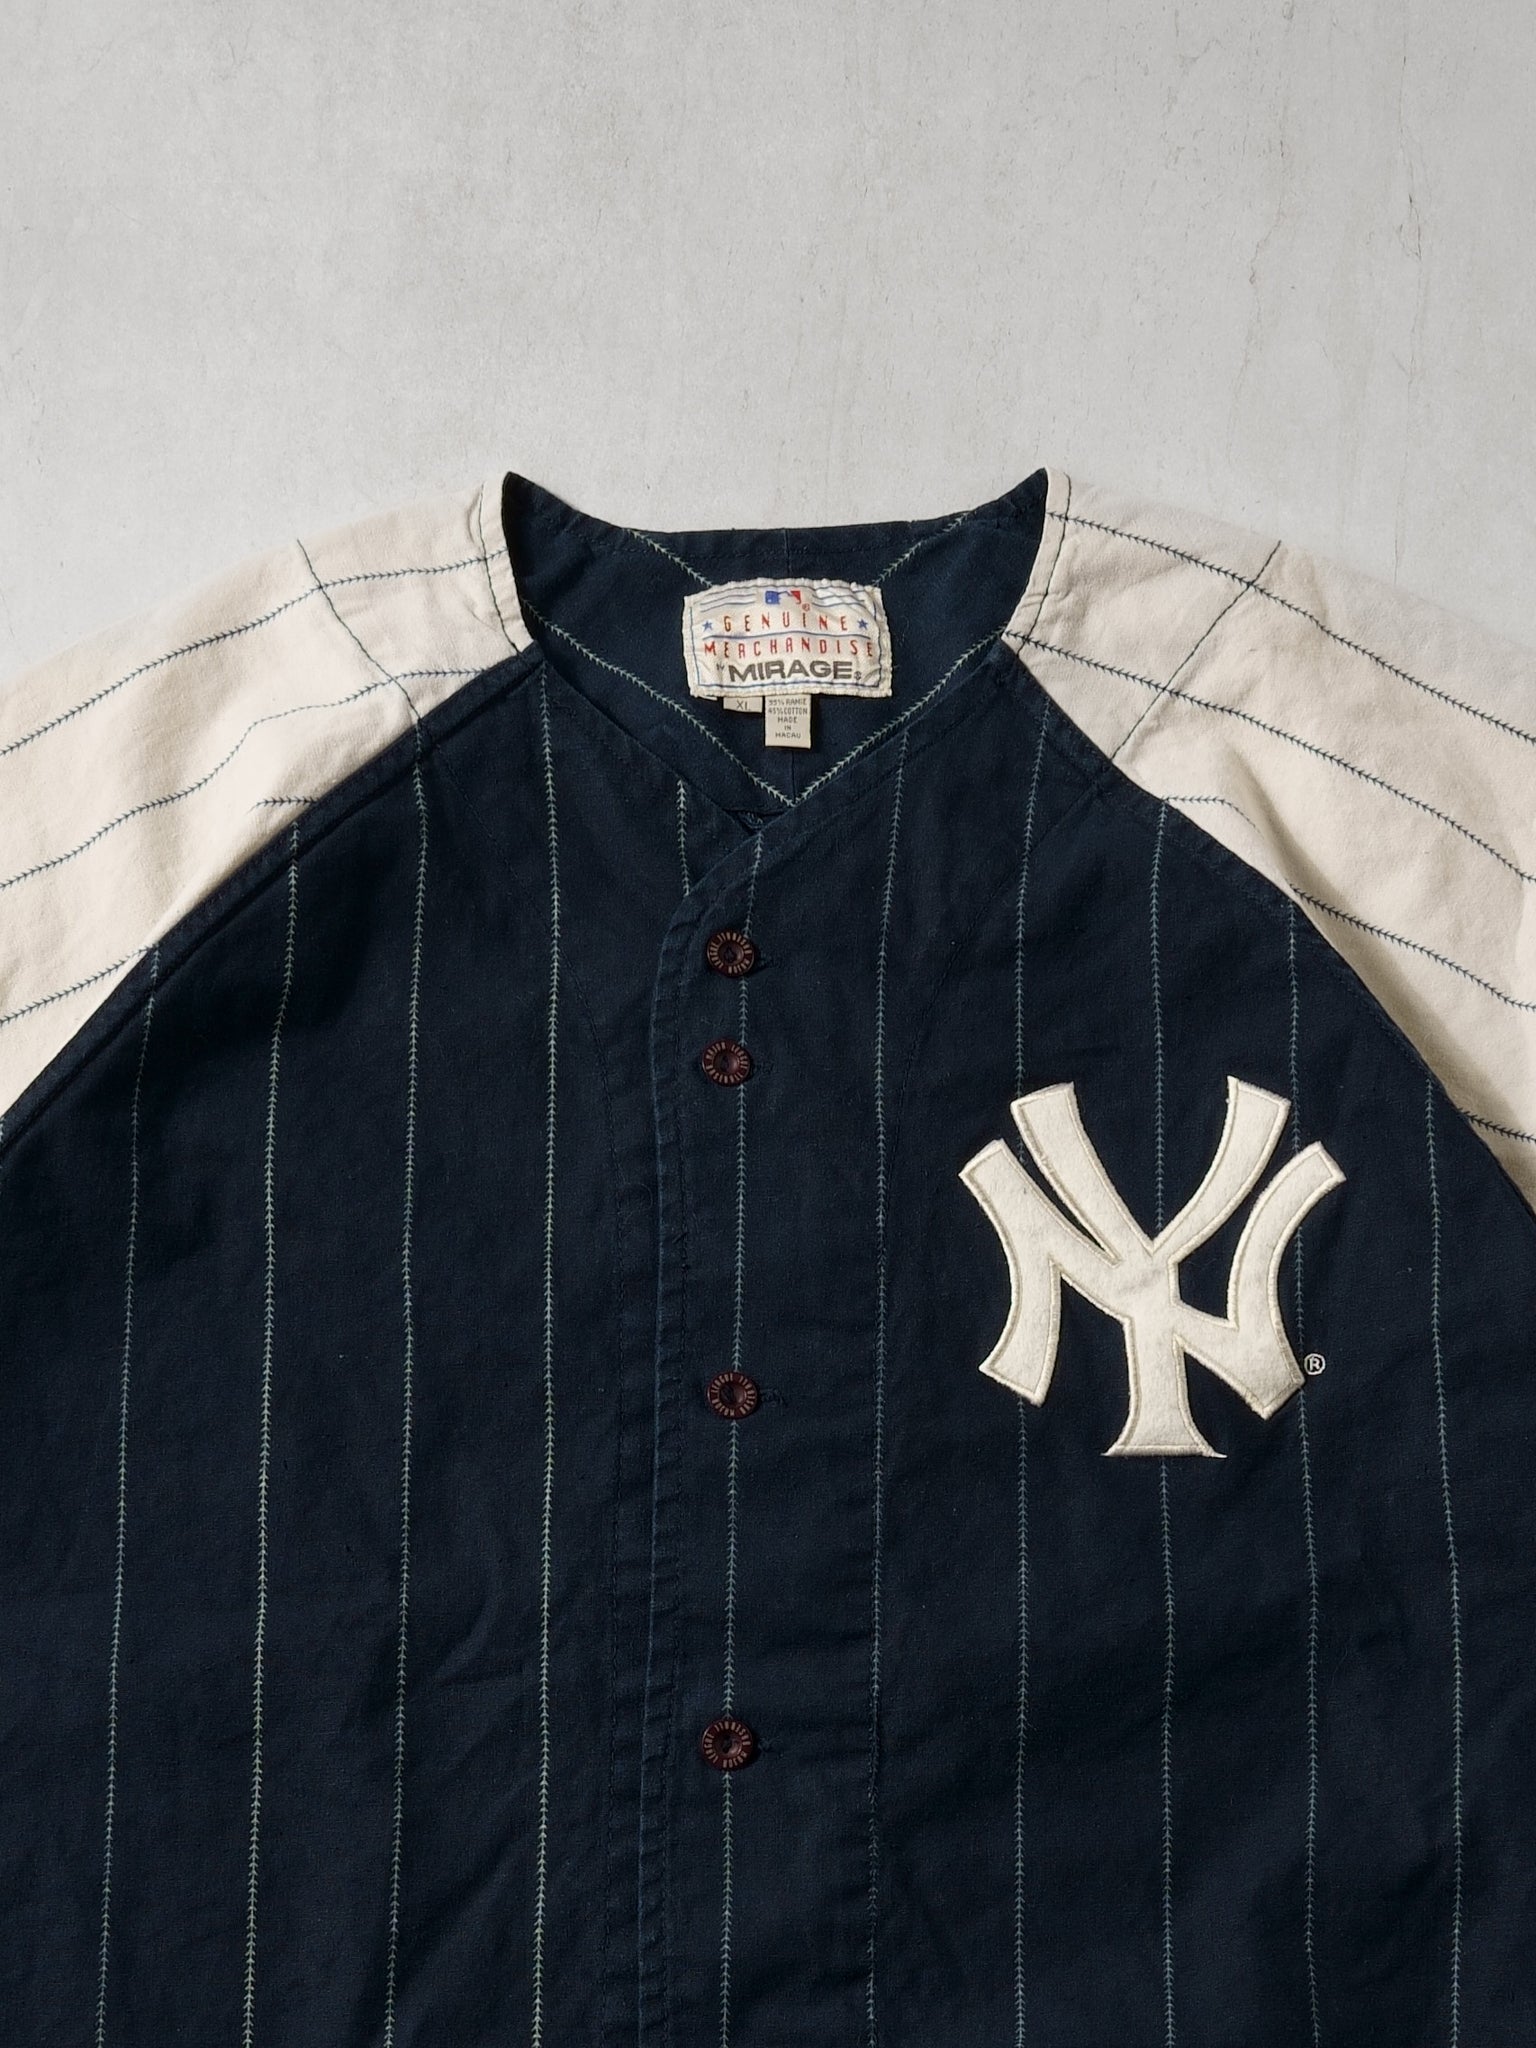 Vintage 90s Navy Blue and White Striped New York Yankees Baseball Jersey (L)